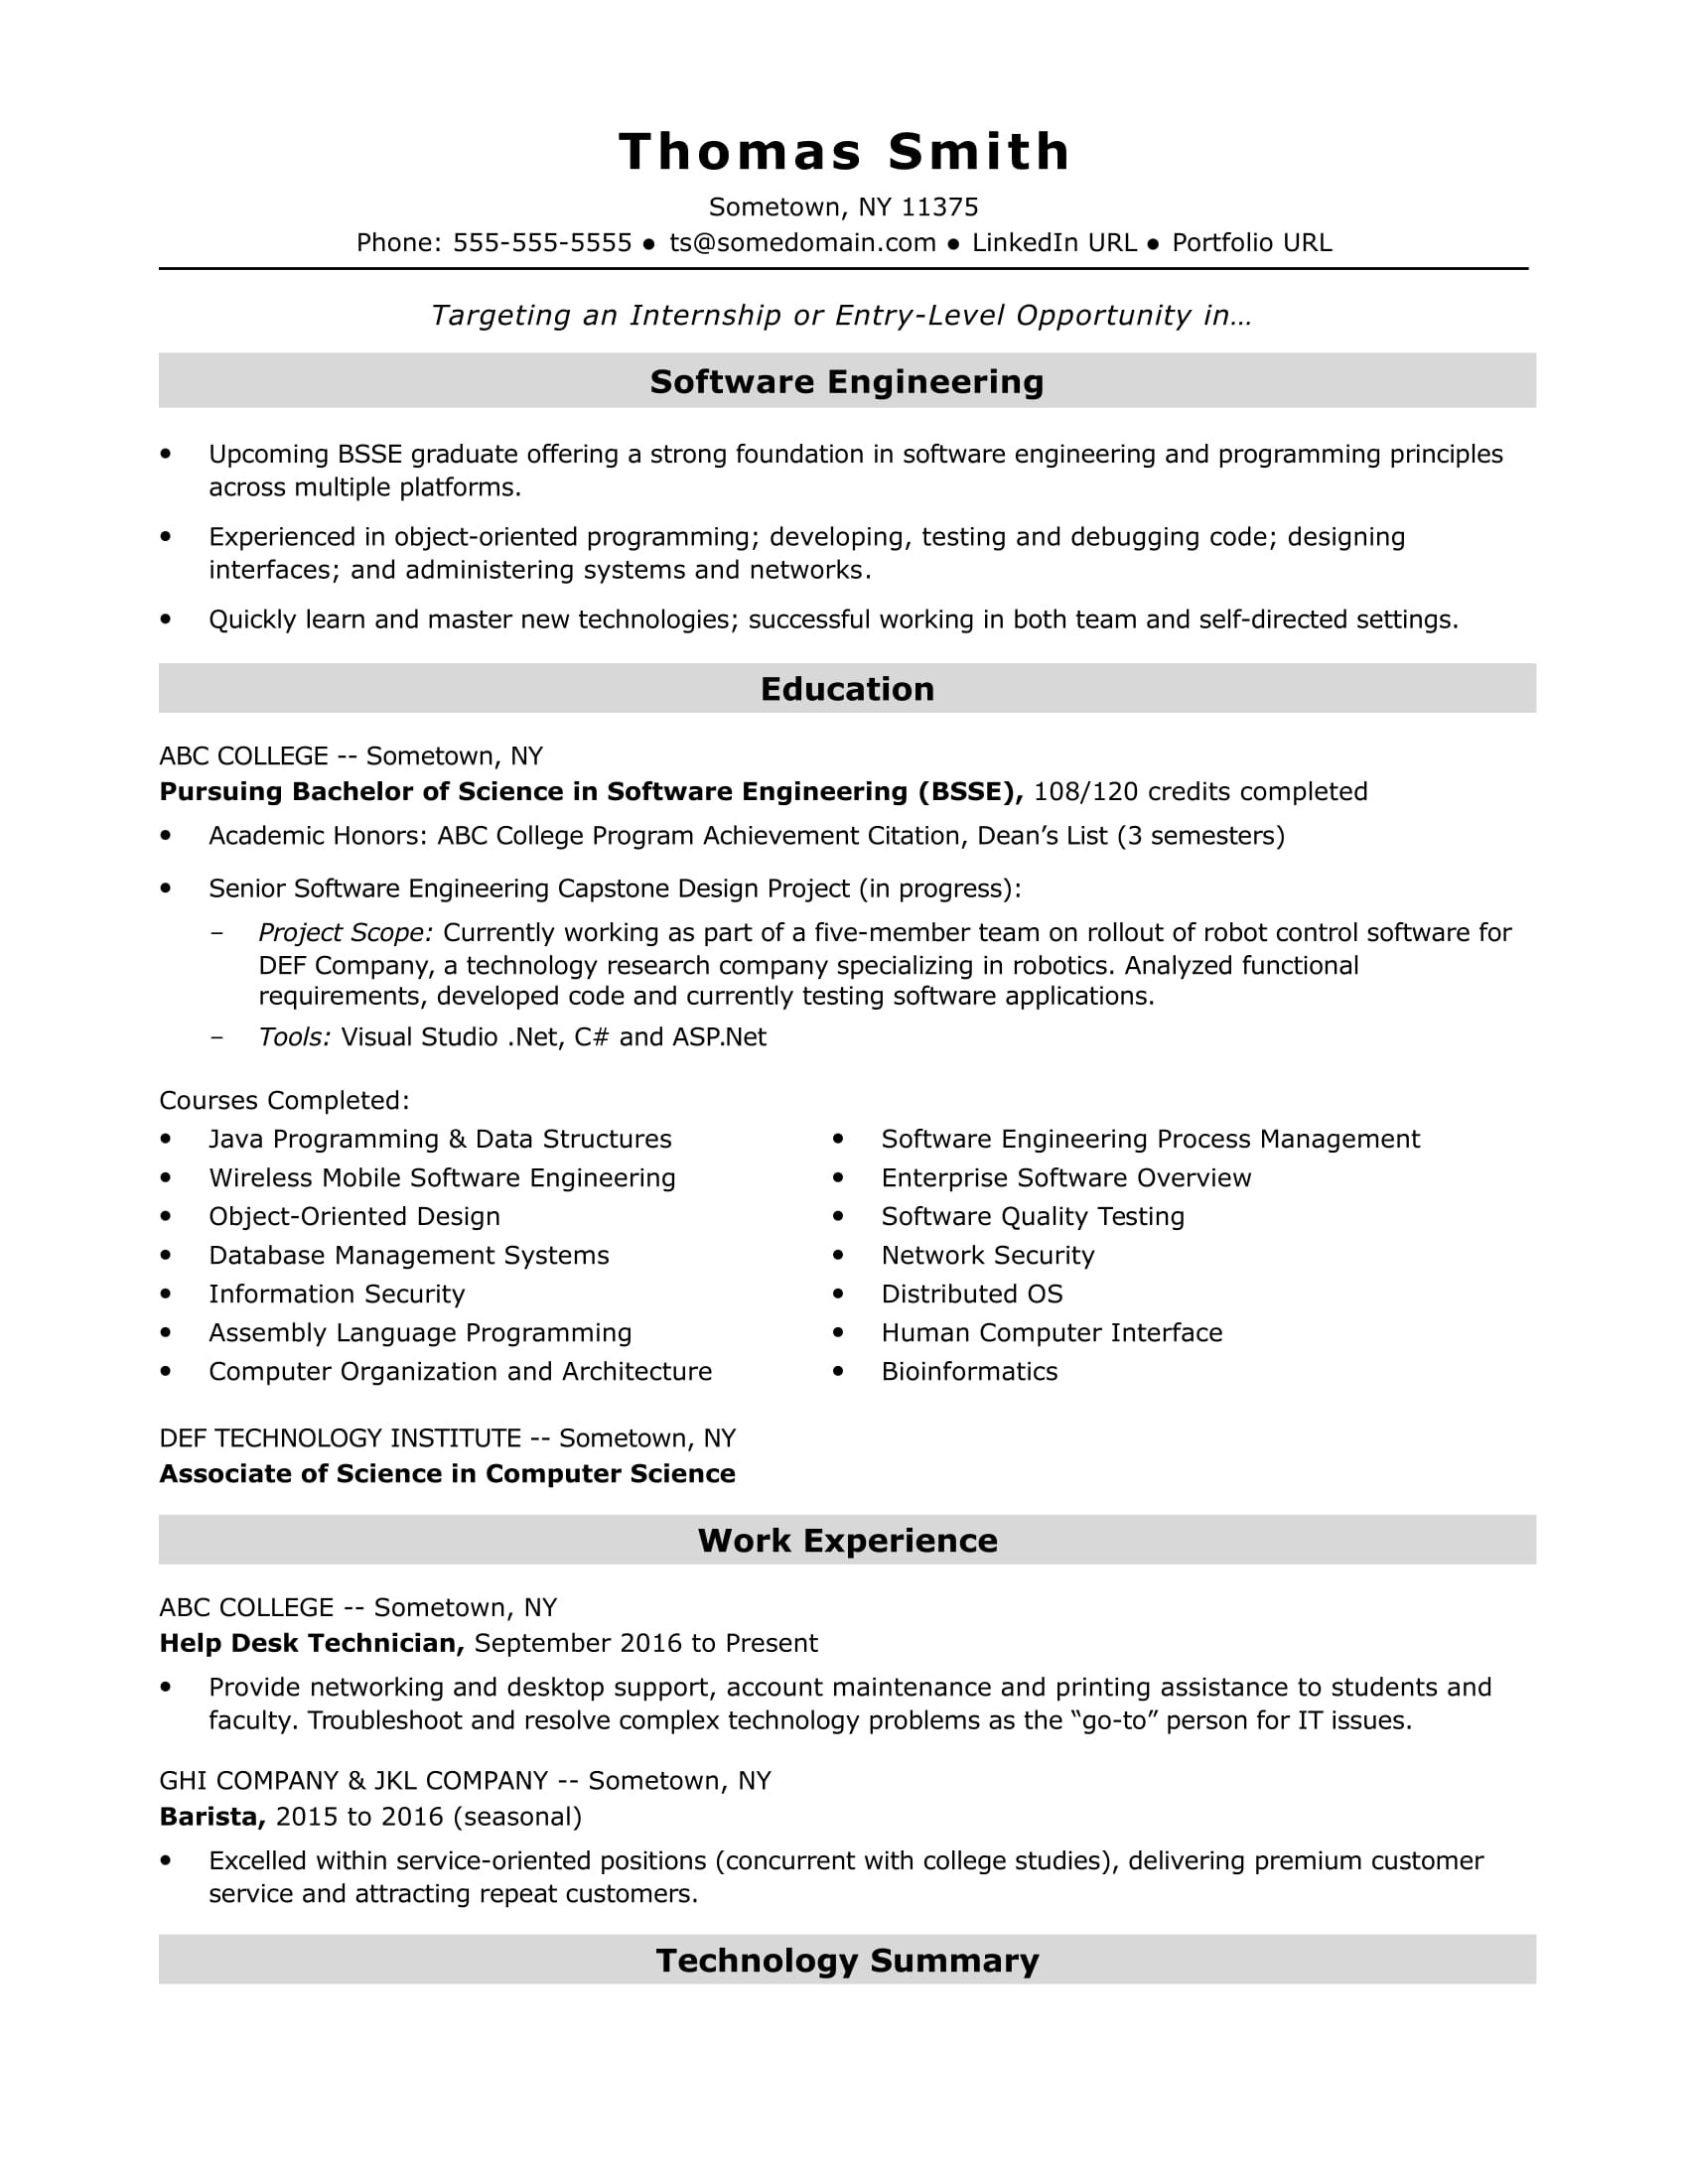 Sample Computer Science Resume Entry Level Entry-level software Engineer Resume Sample Monster.com